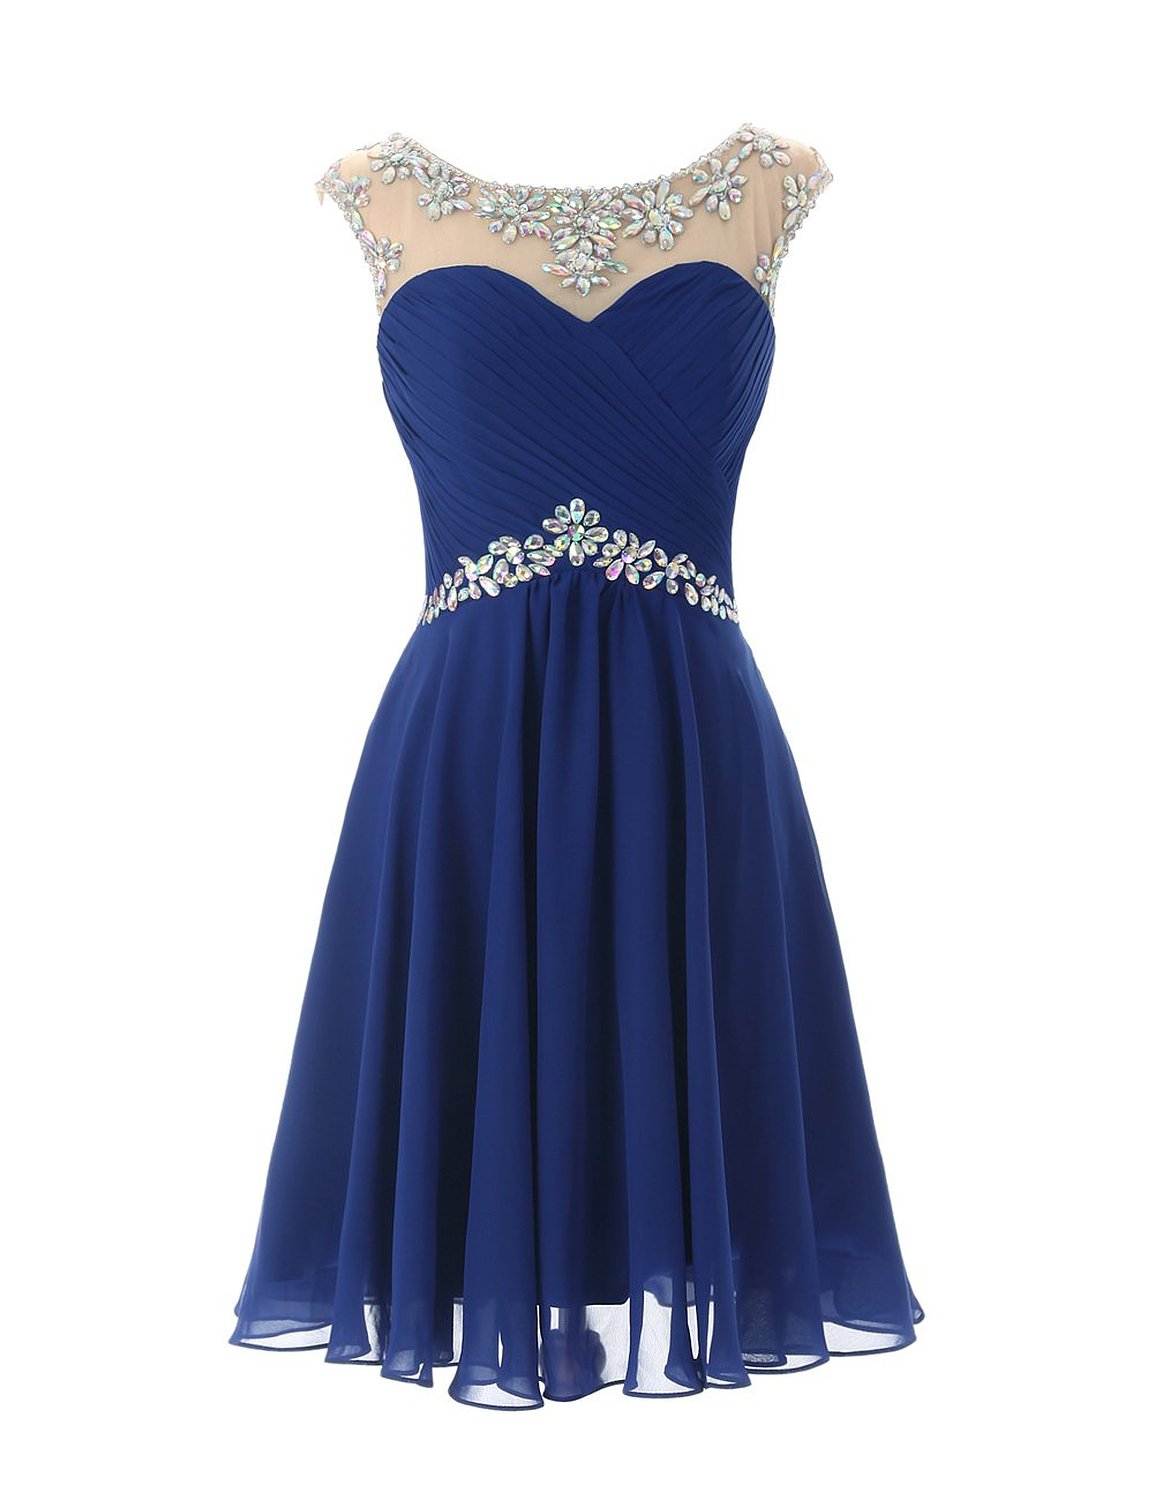 Short Blue Chiffon A-line Homecoming Dress With Crystal Embellished Cap Sleeve Sweetheart Illusion Cutout Back Bodice